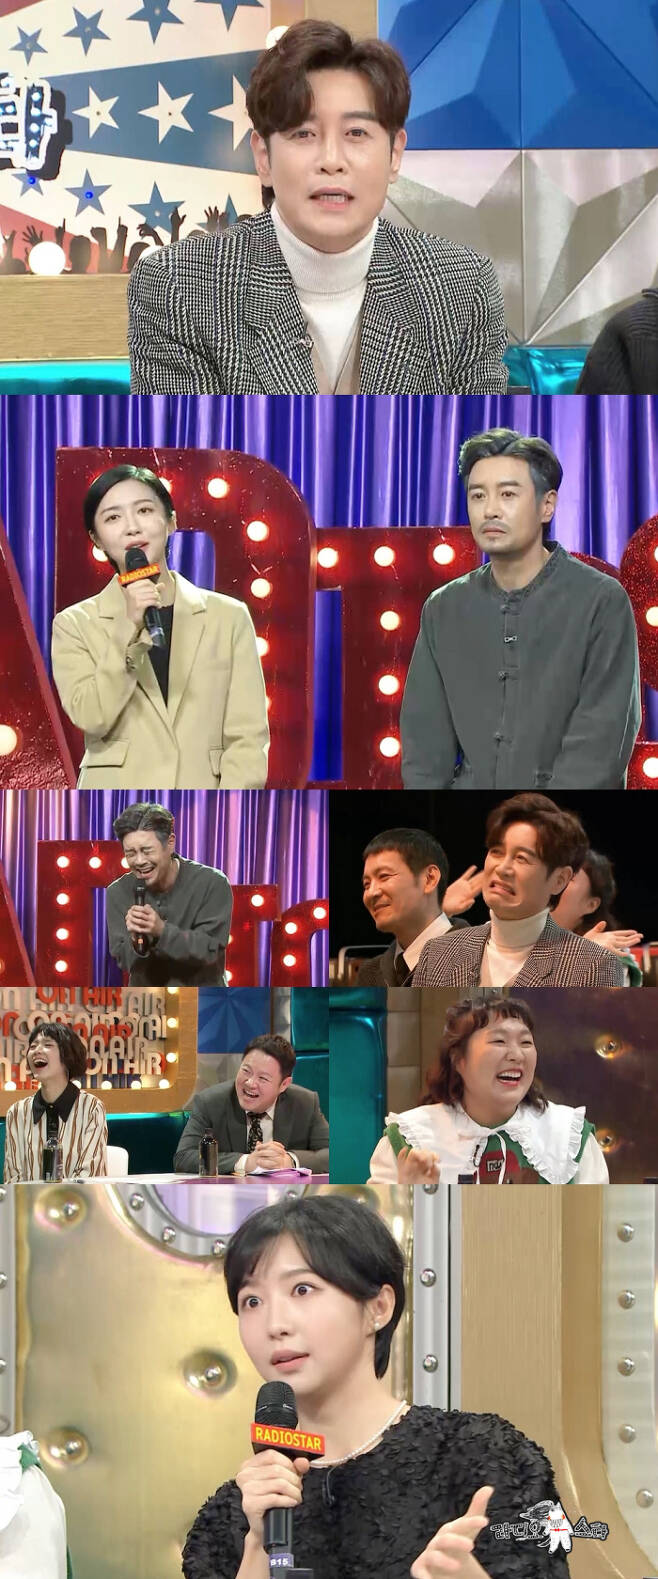 Kim Dae-hee recalls the final episode of Gag Concert.MBC Radio Star (planned by Kang Young-sun/director Kang Sung-ah), which is scheduled to air at 10:30 p.m. today (12th), will feature a feature of Stories Singing Commits on Commitment with Kim Dae-hee, Jung Sung-ho, Lee Su-ji, Joo Hyun-young and Kim Doo-young.Kim Dae-hee said, I am the only comedian who has appeared in the pilot days and the last episode and finished the first and last Gag Concert.Especially, it is said that it reveals the hidden protagonist of the final scene idea which made the fellow comedian as well as the viewers into the tear sea.Kim Dae-hee has released the story of his bookie Dae-hee, which uses the character of Connor Needs Dialogue, which had been popular during the Gag Concert, on YouTube channels, and enjoys the second prime with an average of 2-3 million views.Kim Dae-hee hinted at the secret of Dae-hees big hit and said, I have uploaded it at 9 pm on Sunday night despite the extreme tide around me.